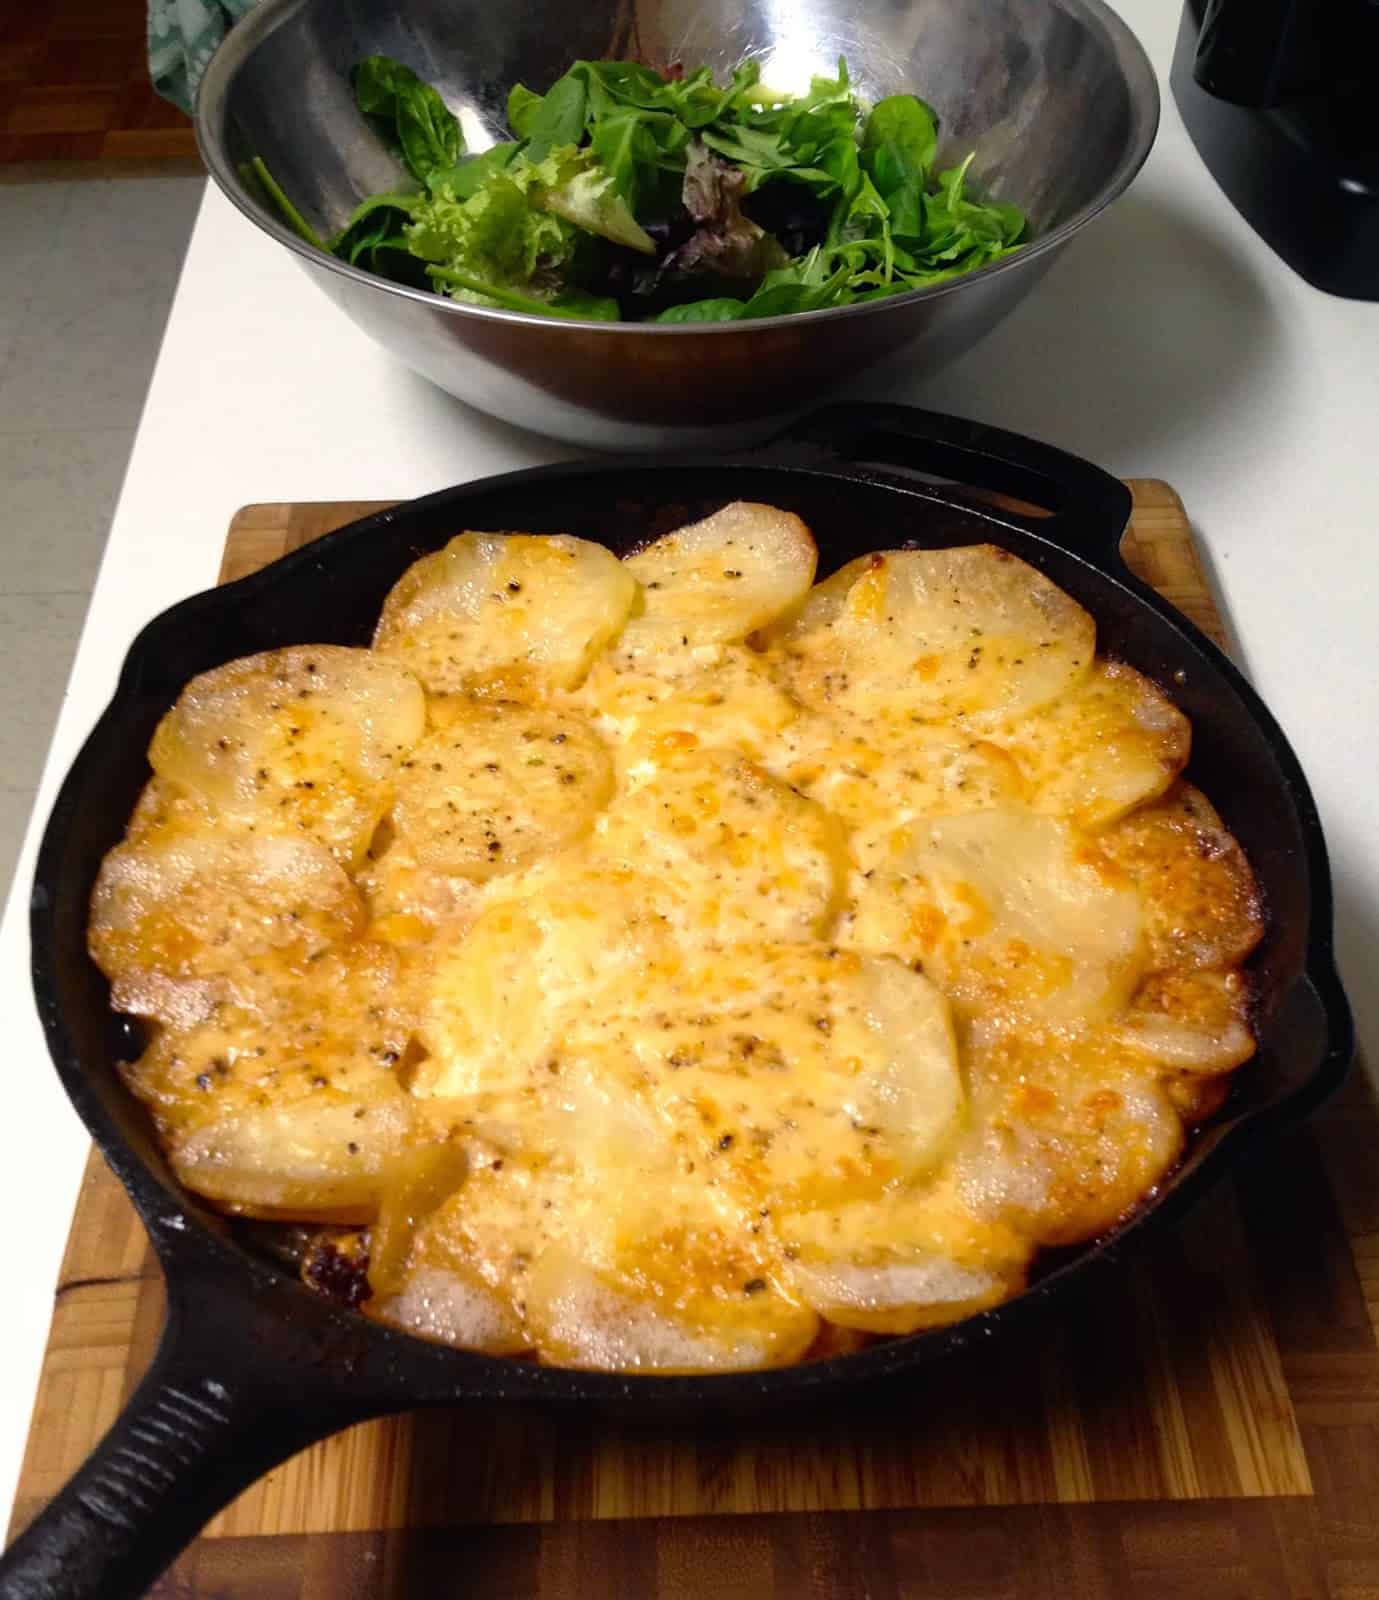 Meat Mushroom and Potato Skillet Gratin Adapted from Melissa Clark in The New York Times